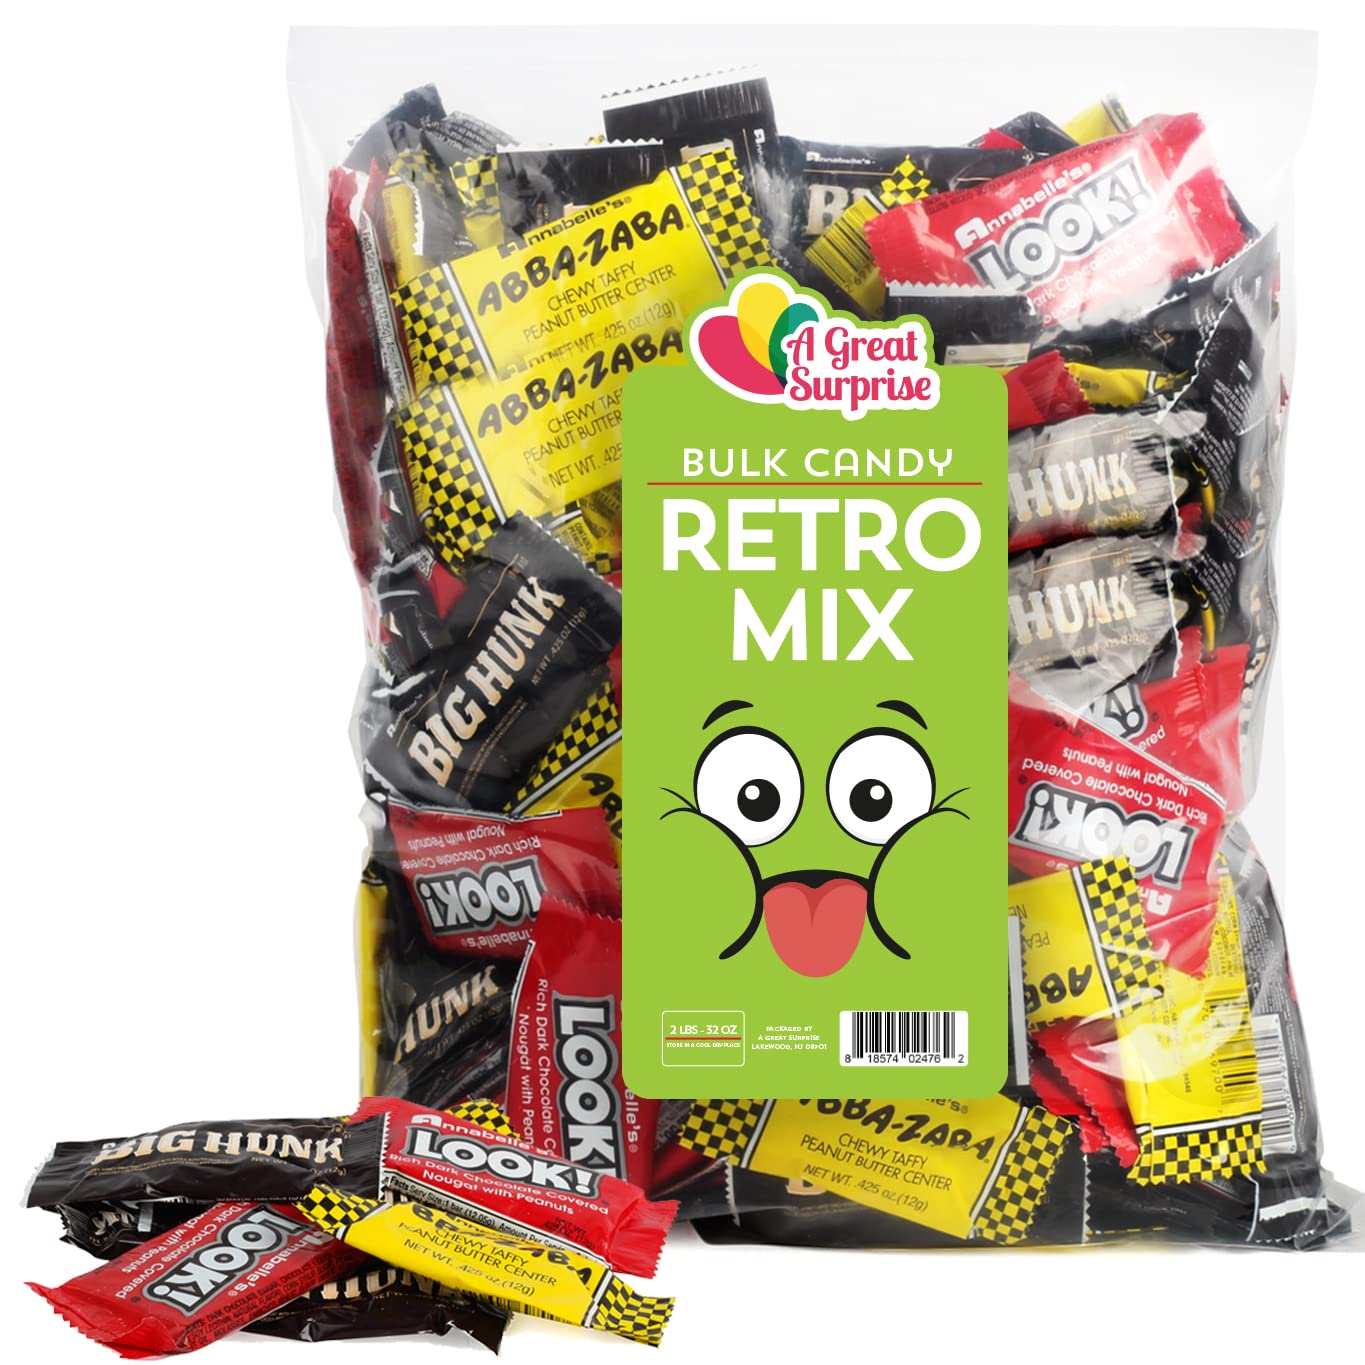 Big Hunk, Abba Zabba, and Look Mini Bars - Annabelle Candy Mix - Easter Chocolate Peanut Candies - Vintage, Retro Sweets - Bulk Candy - 2 LB